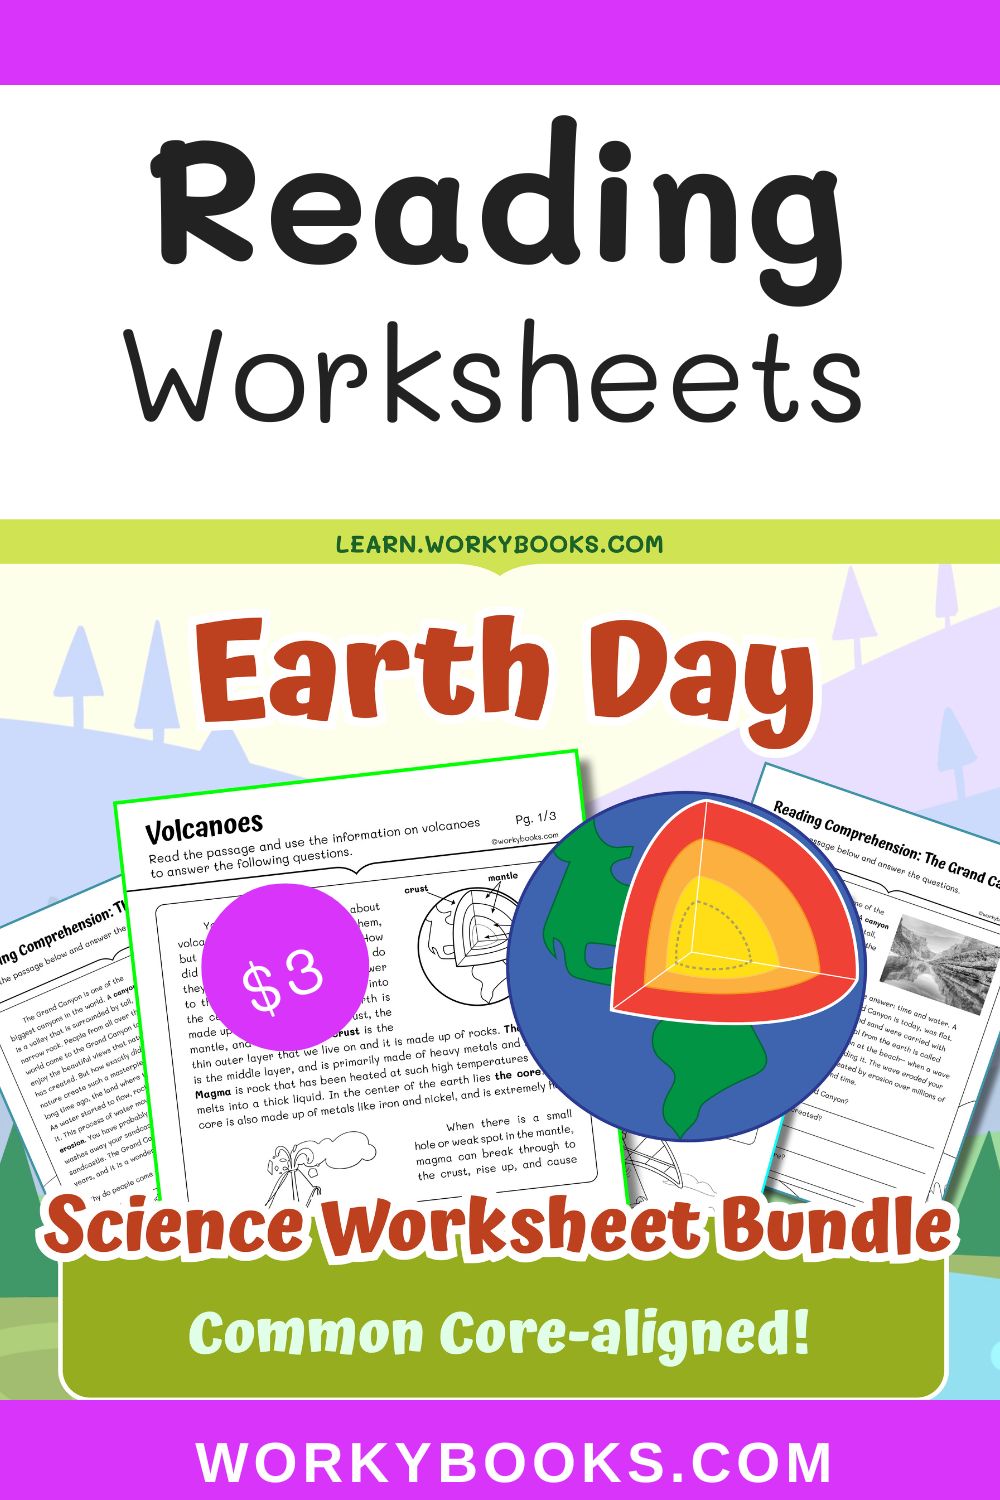 Reading Worksheets Science (1)